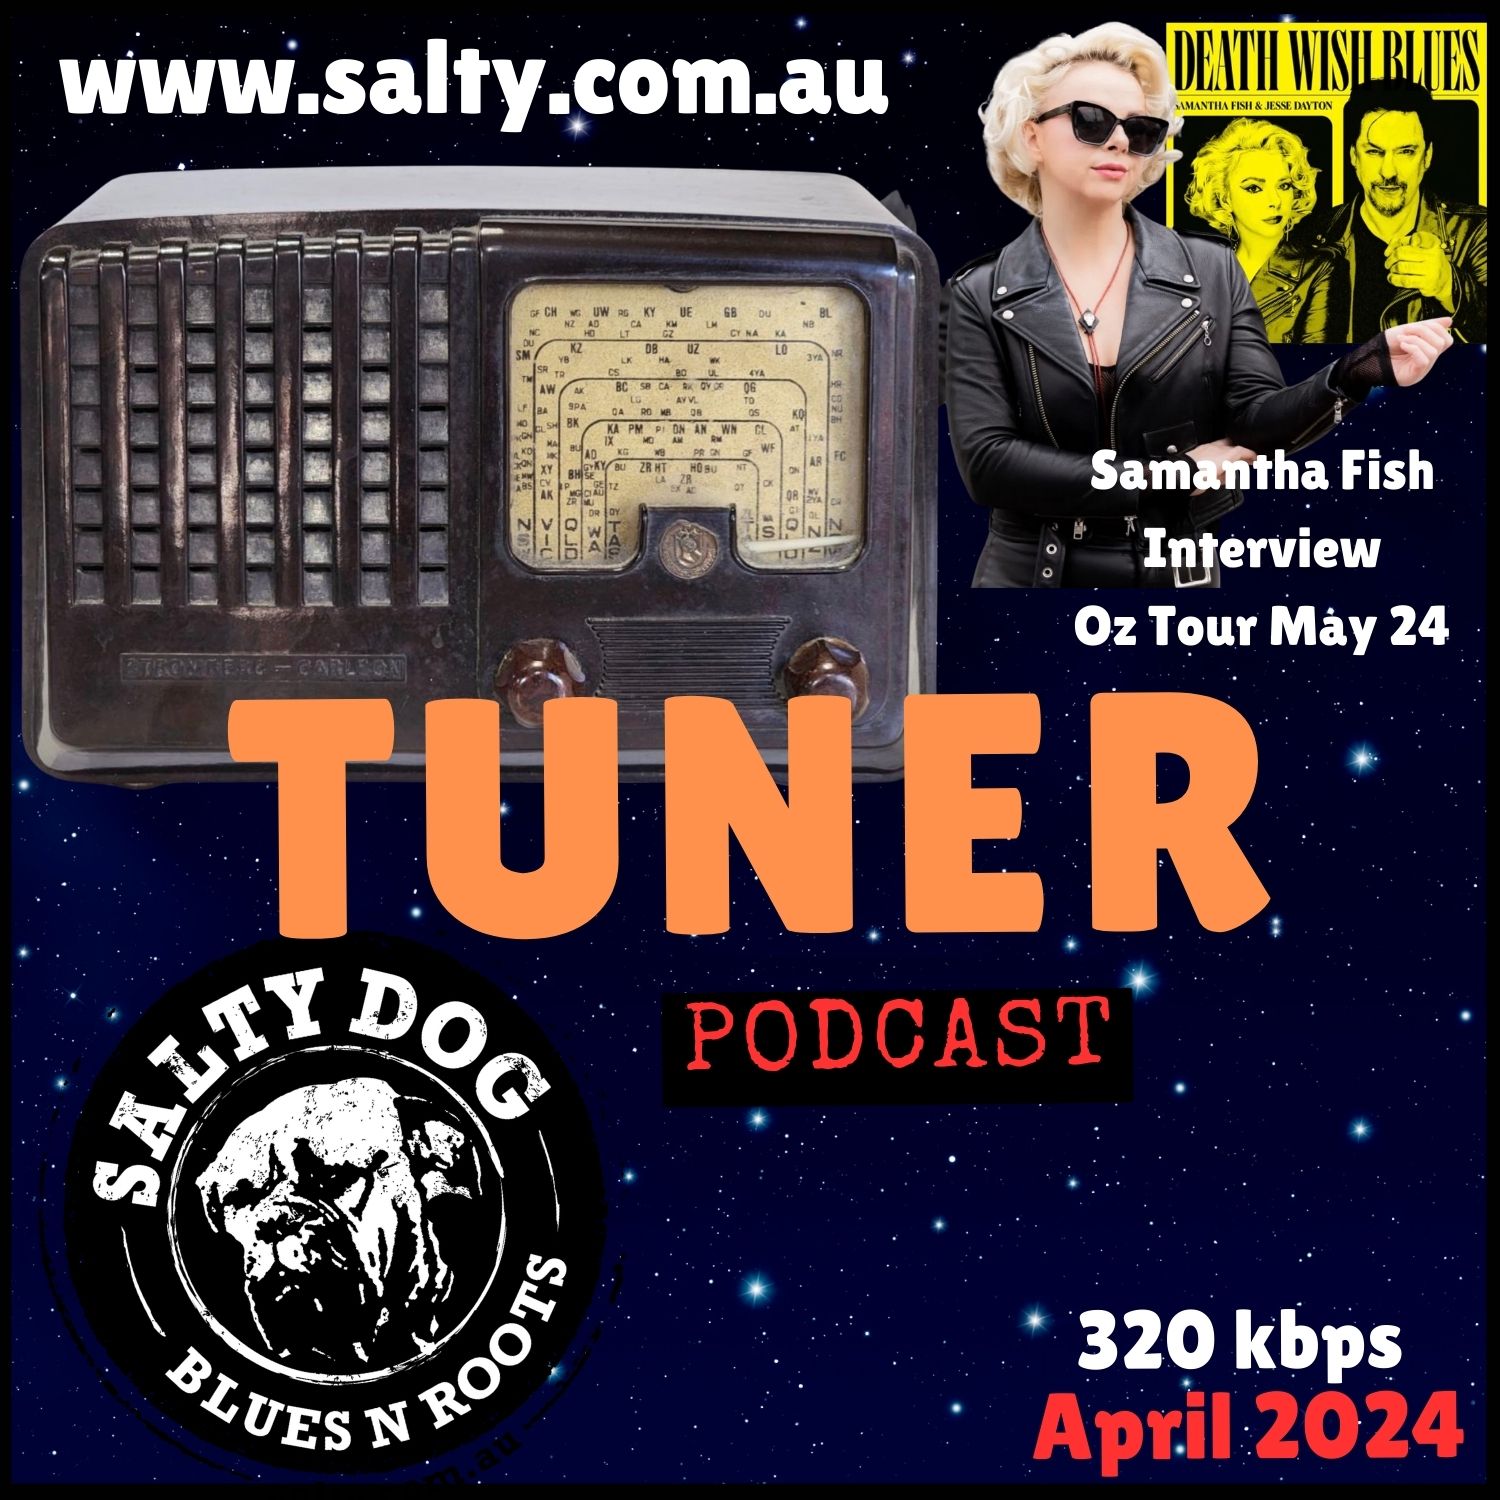 TUNER Blues N Roots - Salty Dog (April 2024)